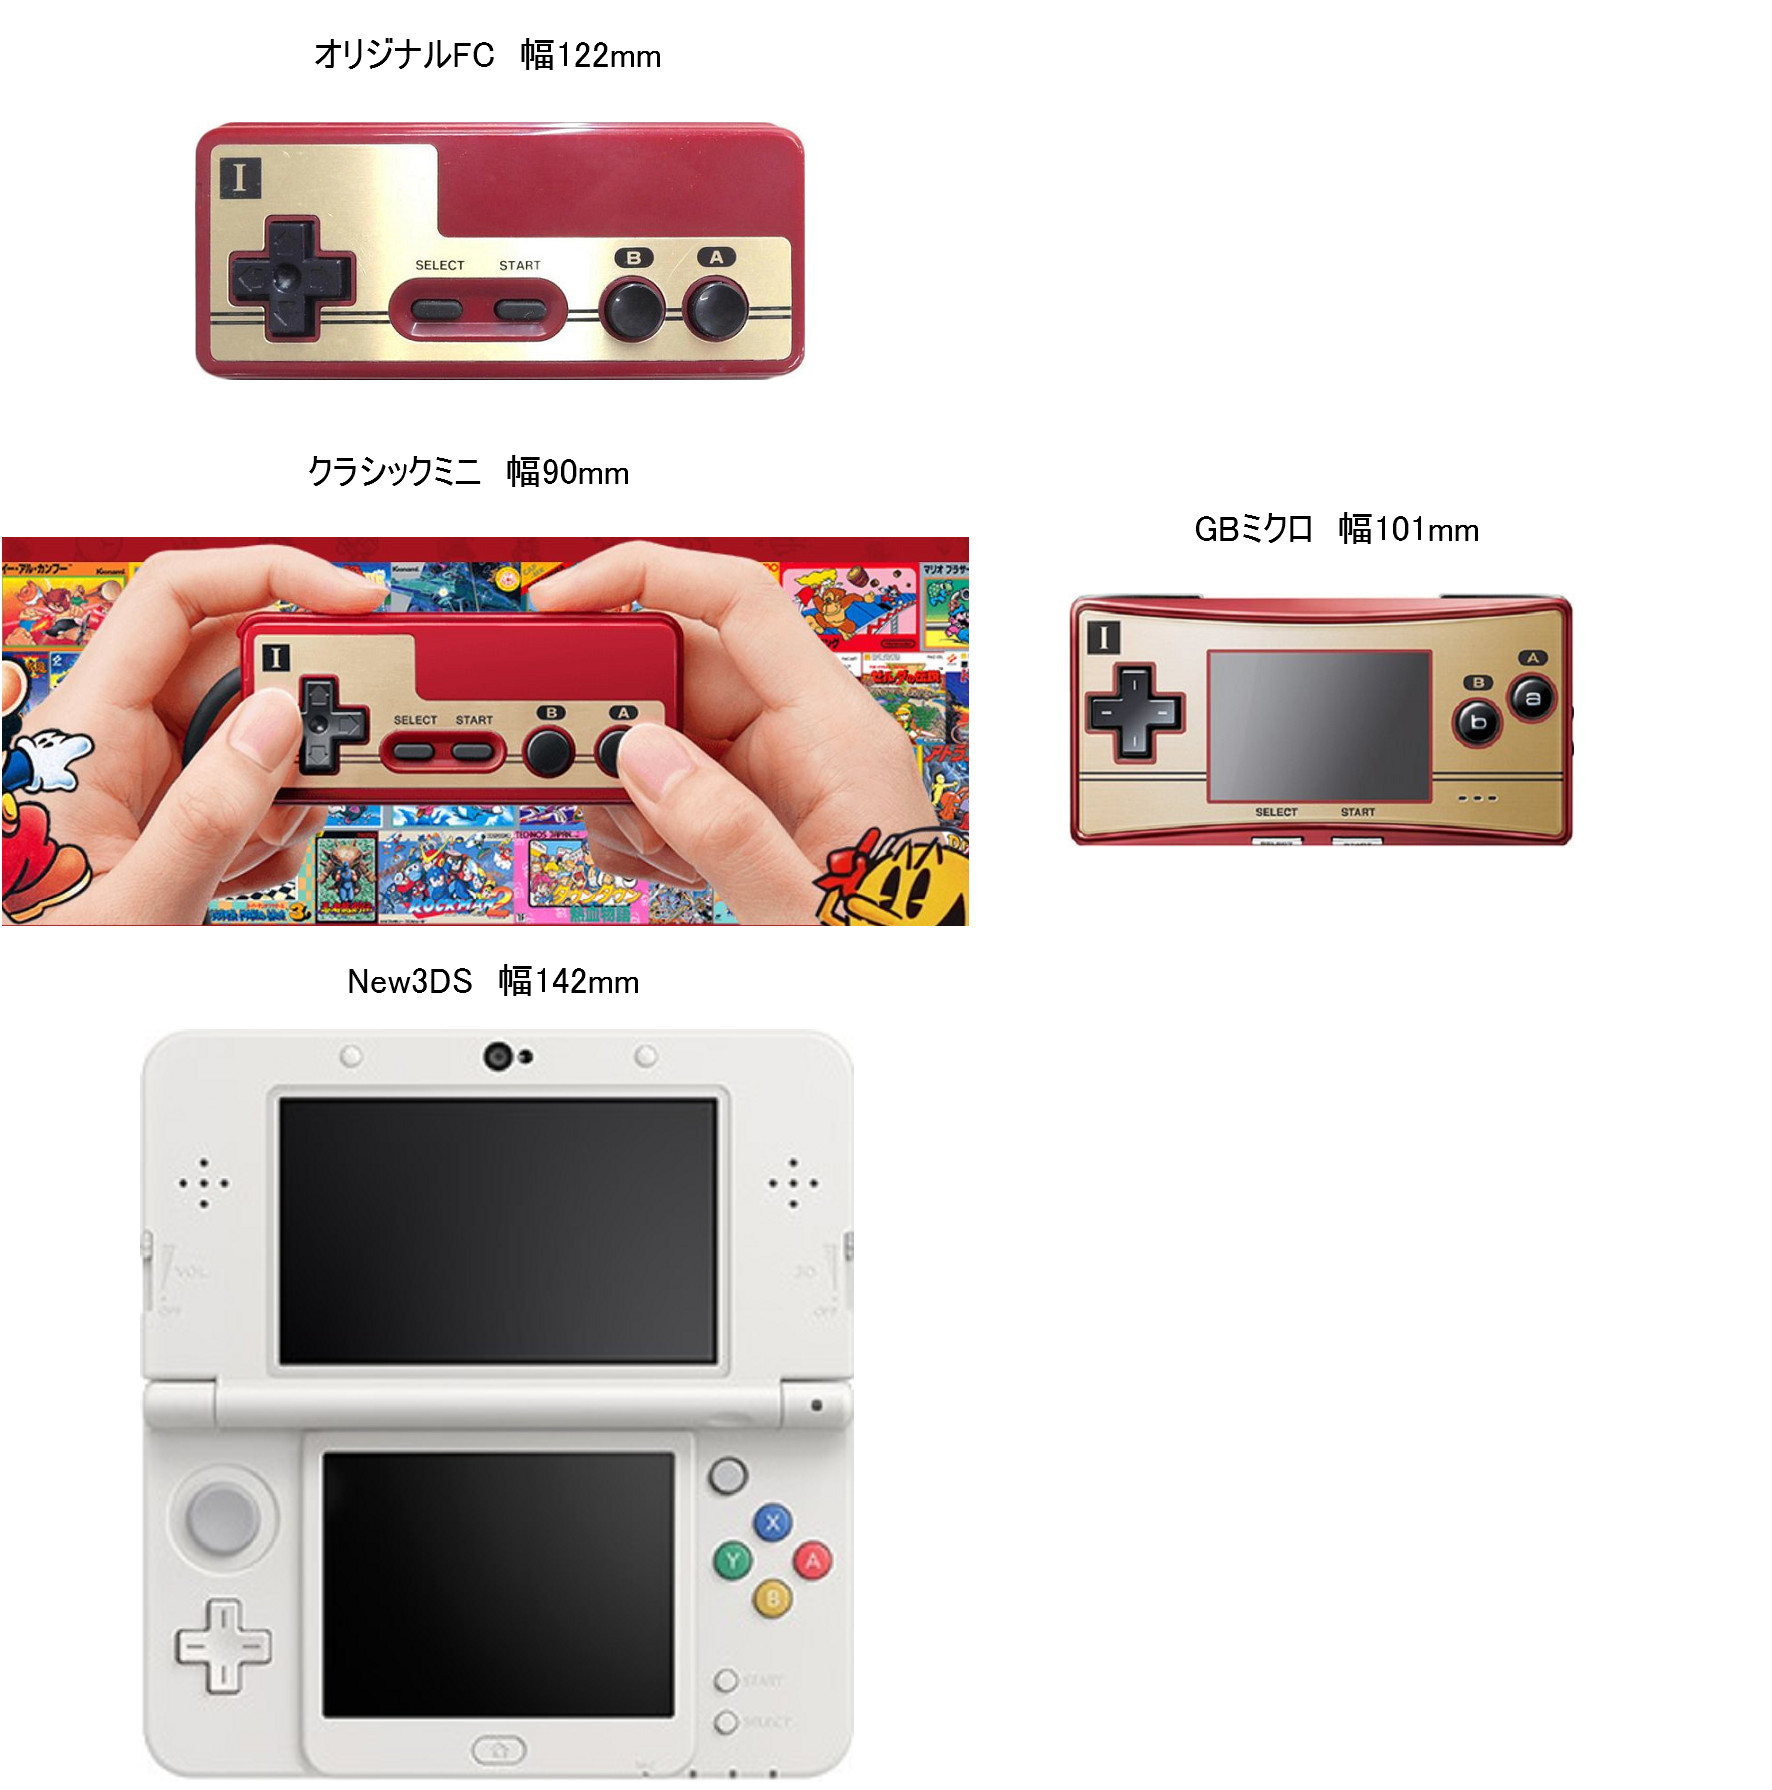 The Controller For The Mini Famicom Seems Small